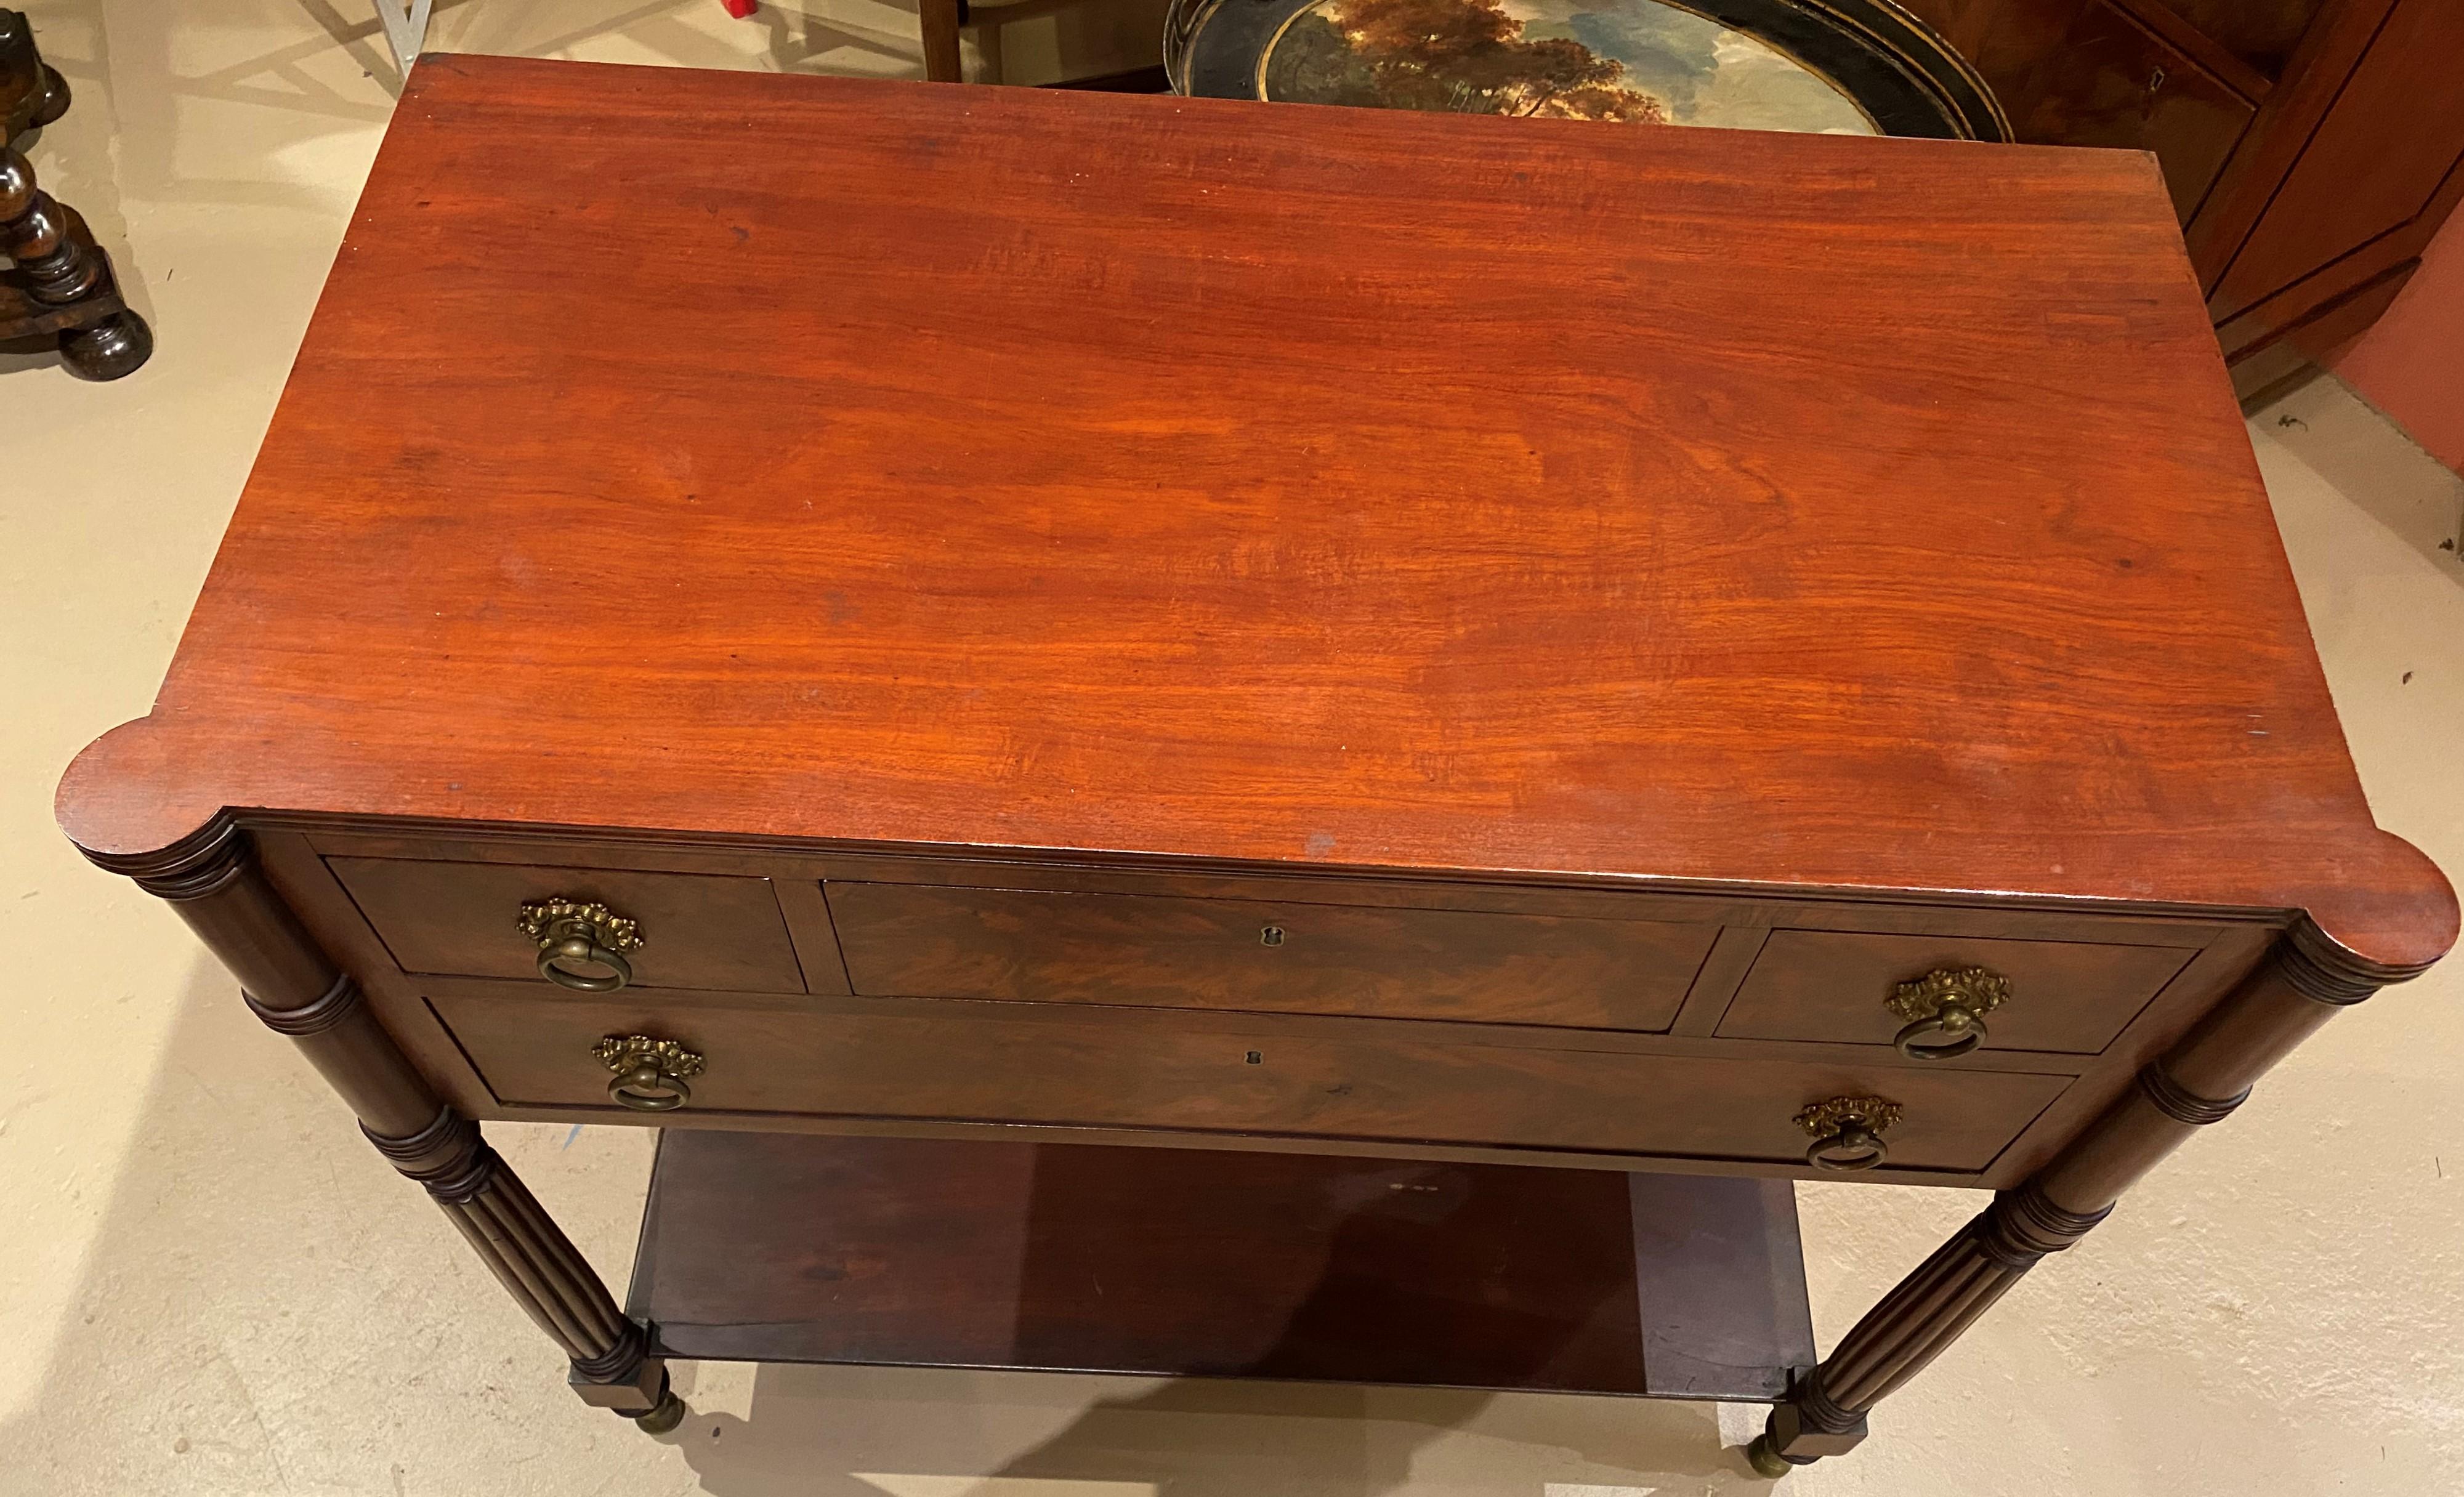 A fine Federal mahogany server with rectangular top with front turret corners surmounting a case with three fitted drawers over one long drawer, brass ring pulls, reeded front legs terminating with brass capped feet, and turned rear legs with a